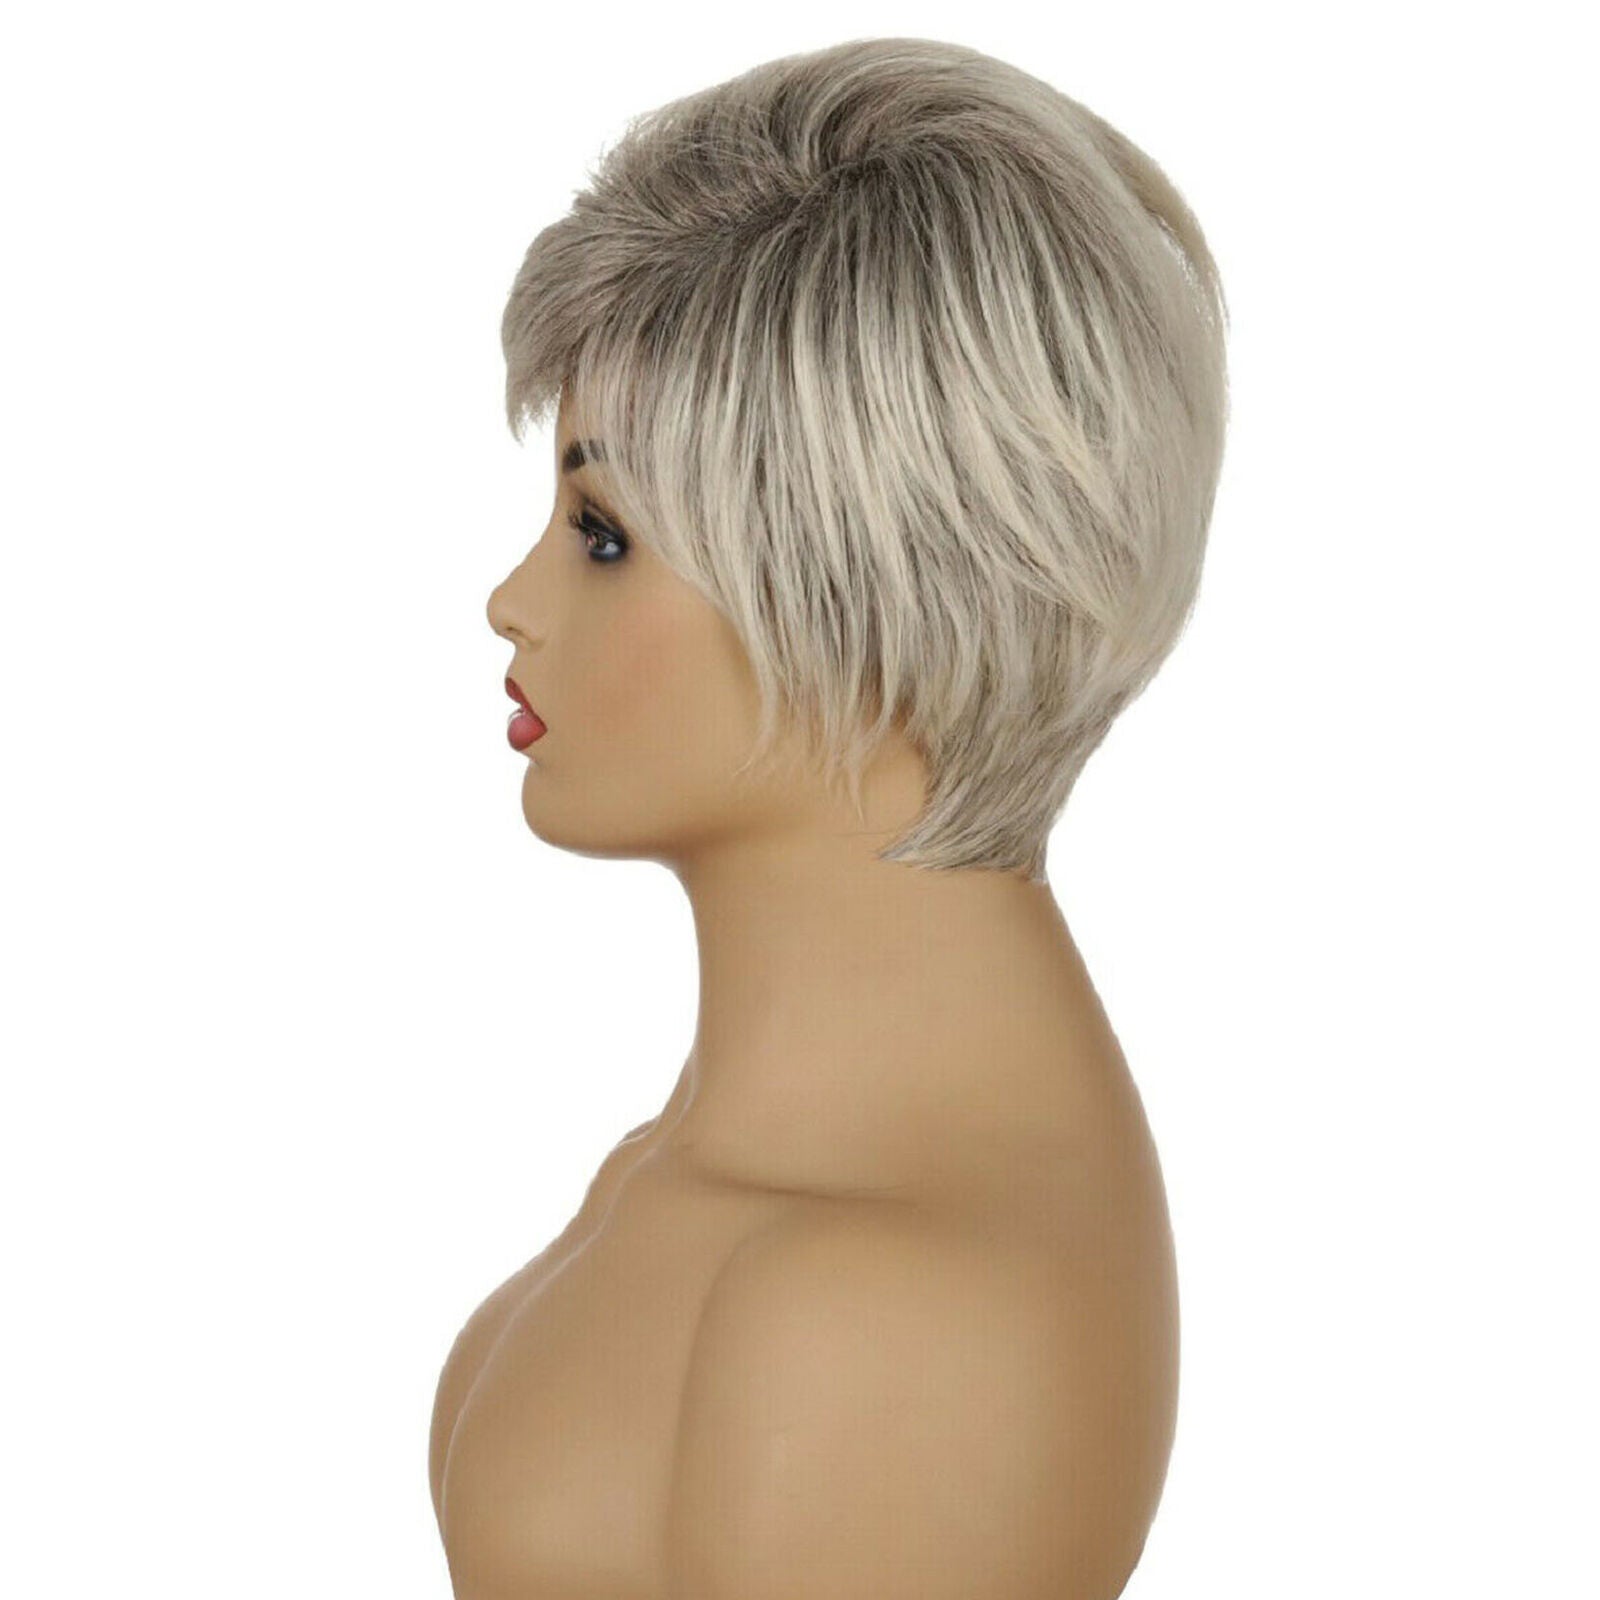 Fashion Synthetic Ombre Wig Short Straight Hair Pixie Cut Bob Wigs For Women